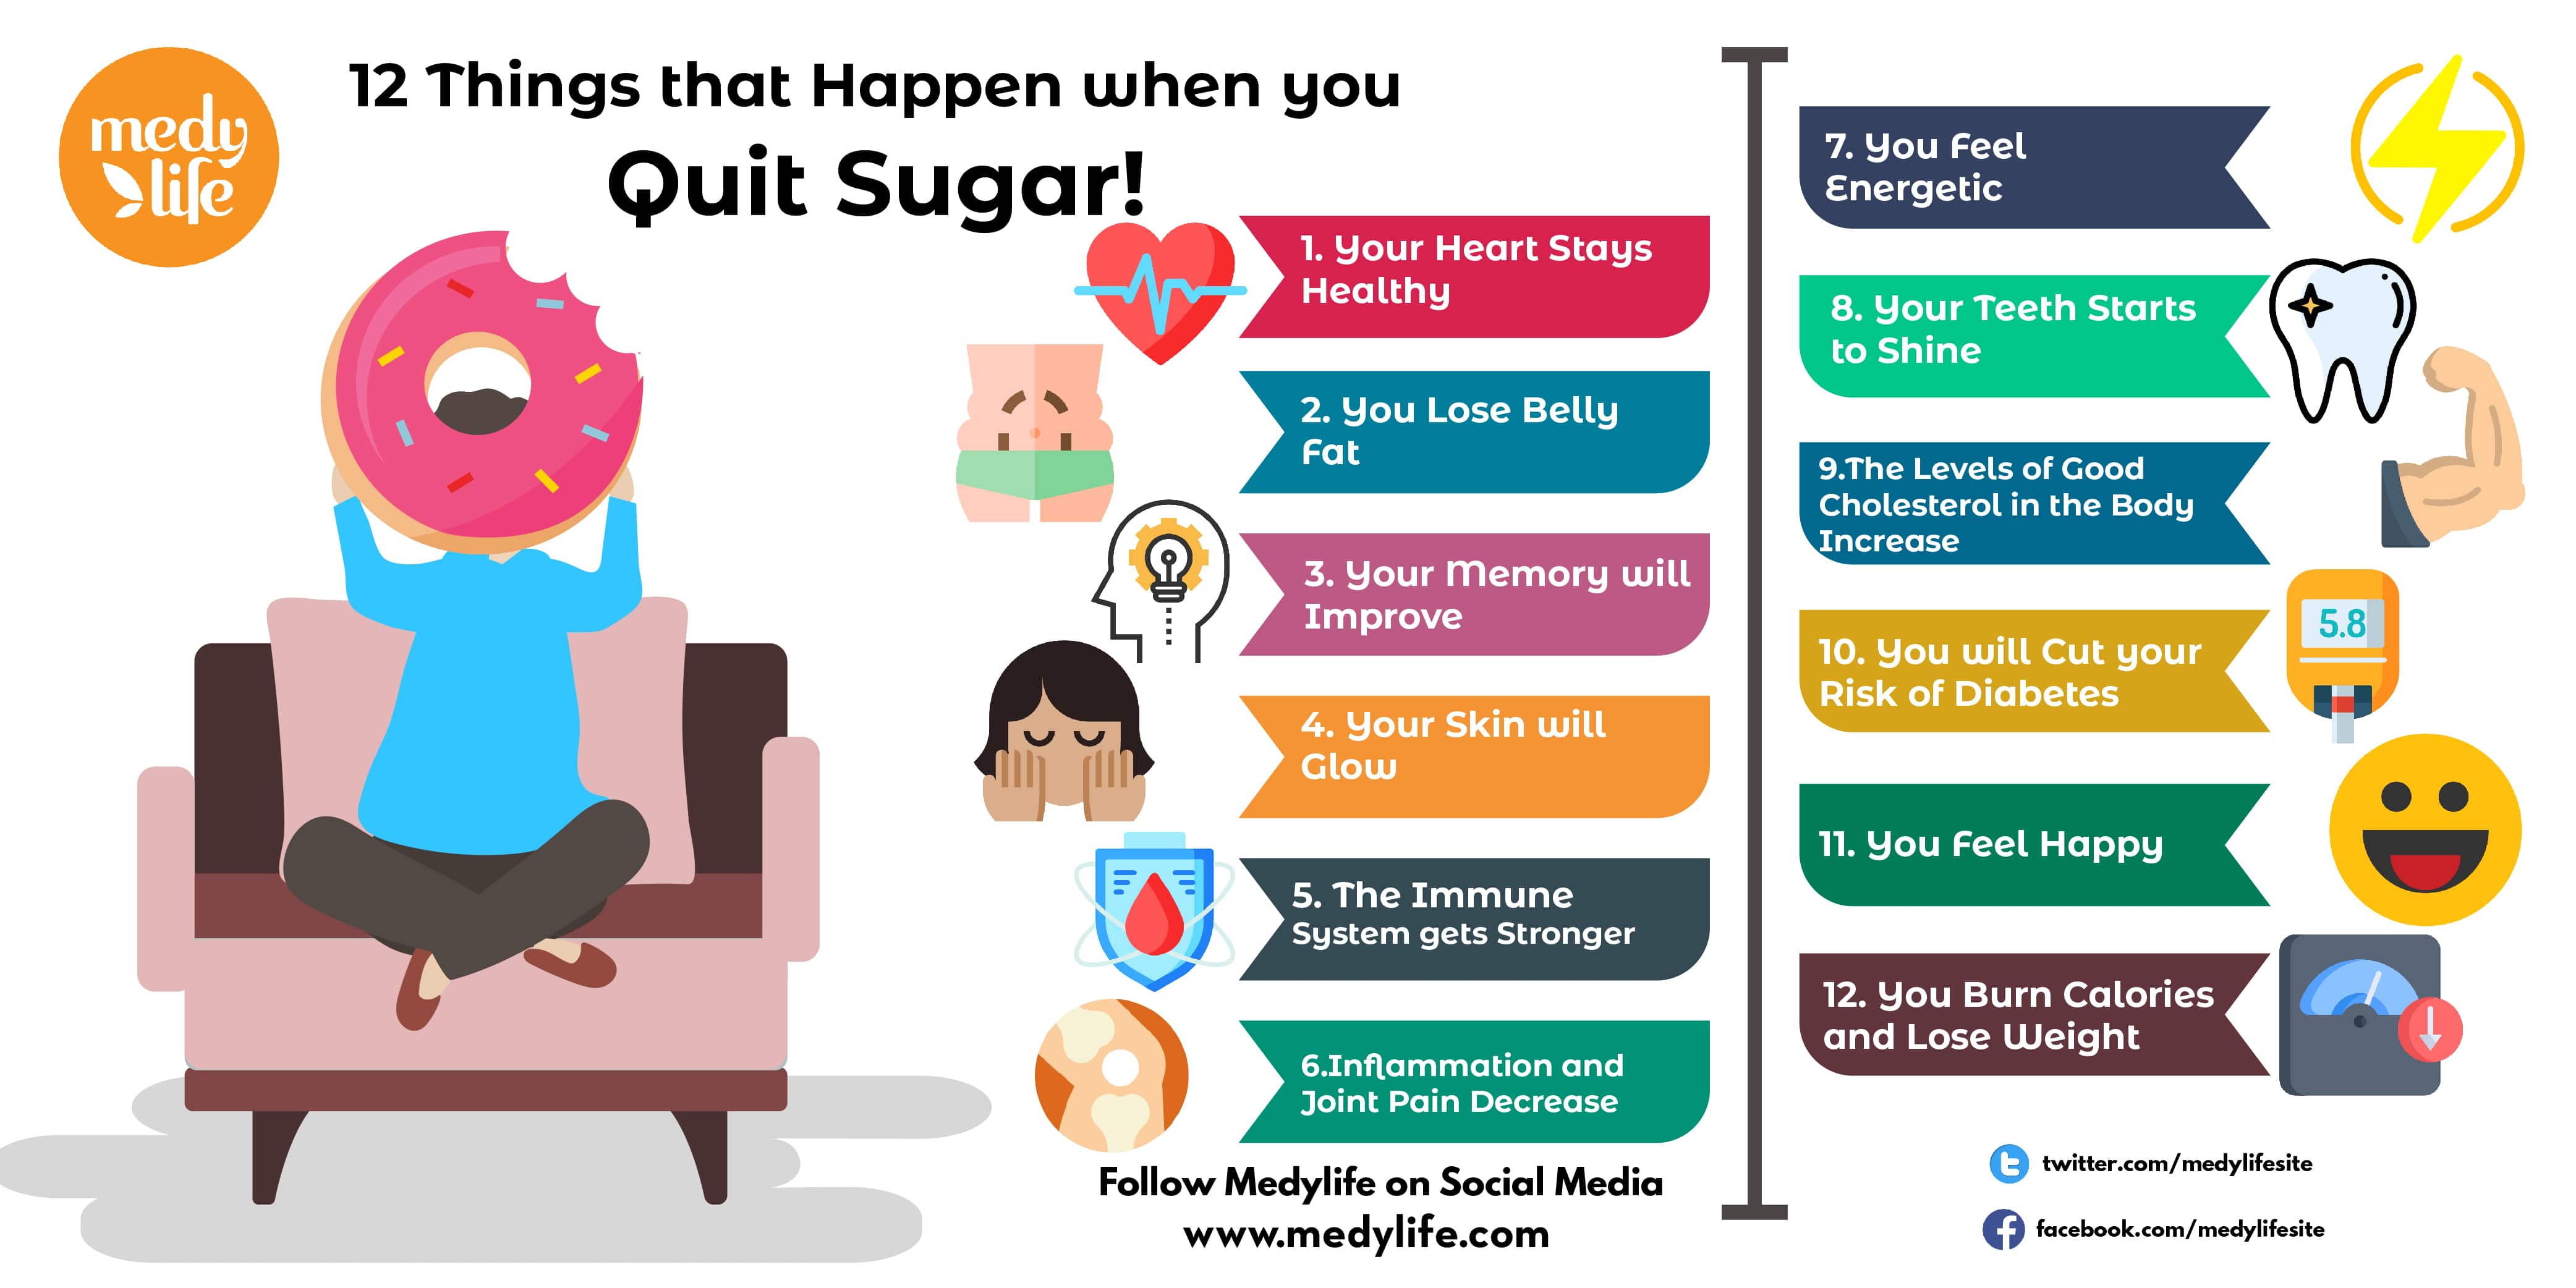 13 Things that Happen when you Quit Sugar INFO